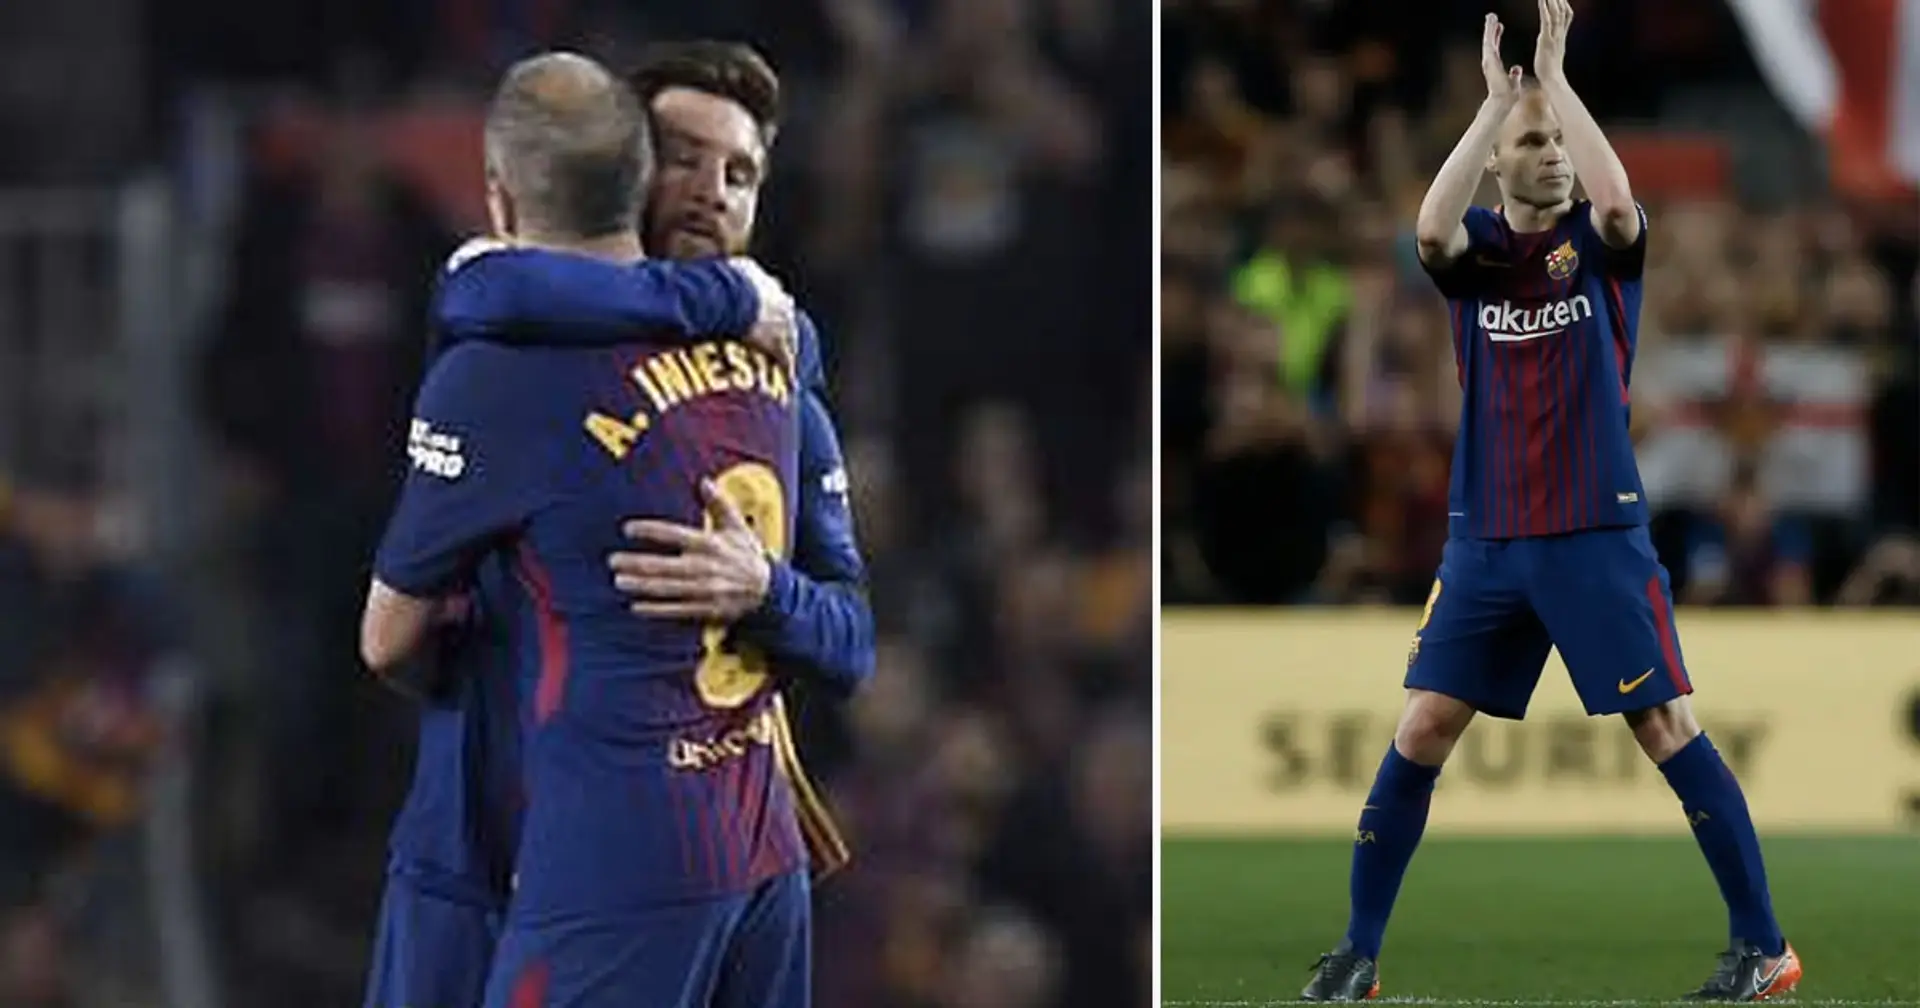 Heartfelt moment when Iniesta passed armband to Messi in his last Clasico: what did he tell Leo?